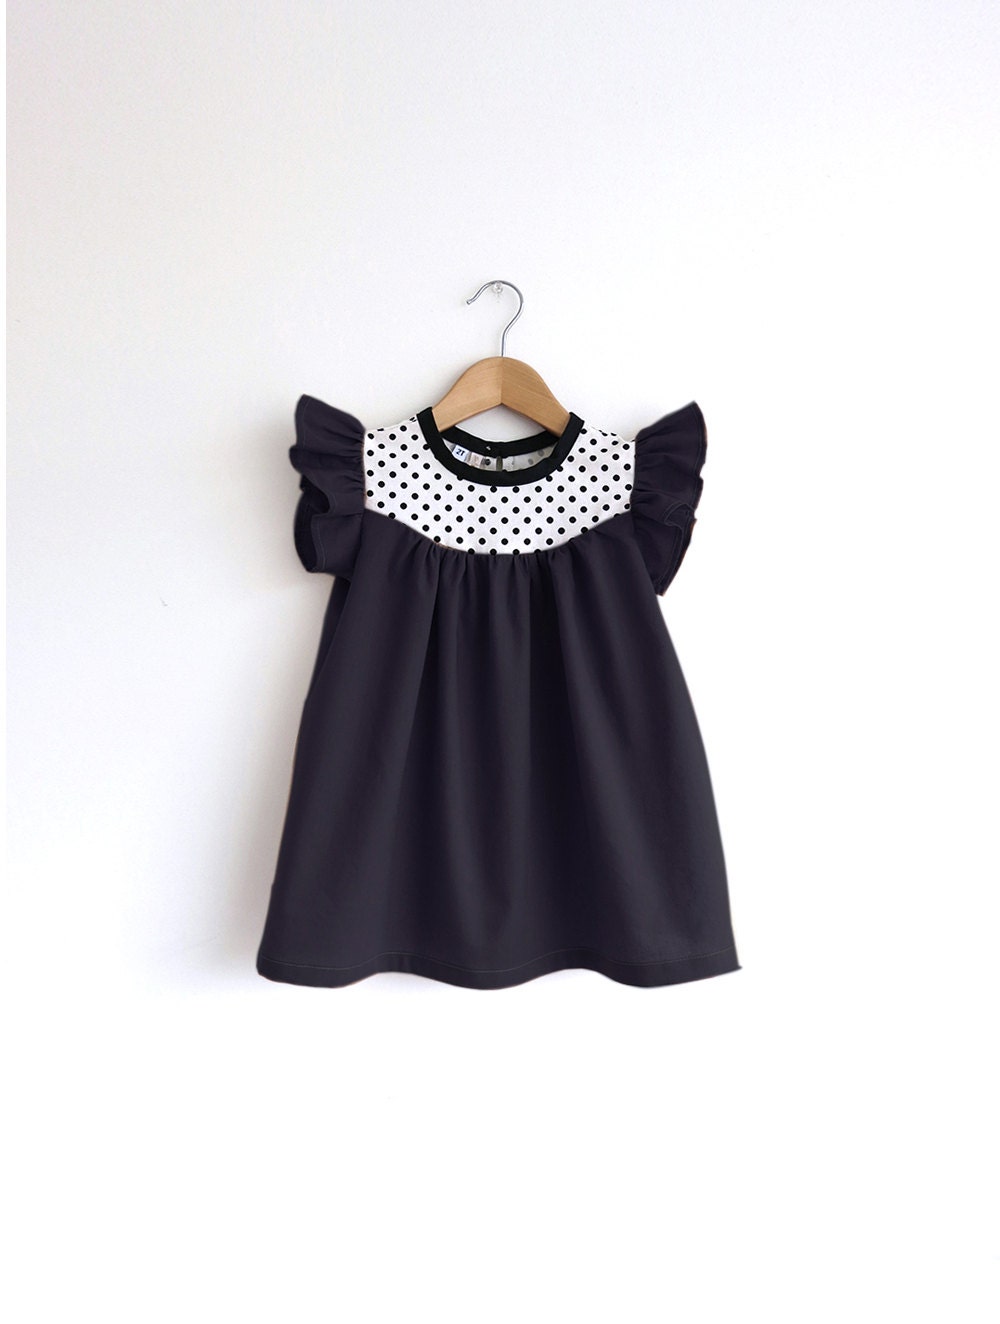 size 4/5T only: girls black cotton dress with dots detail